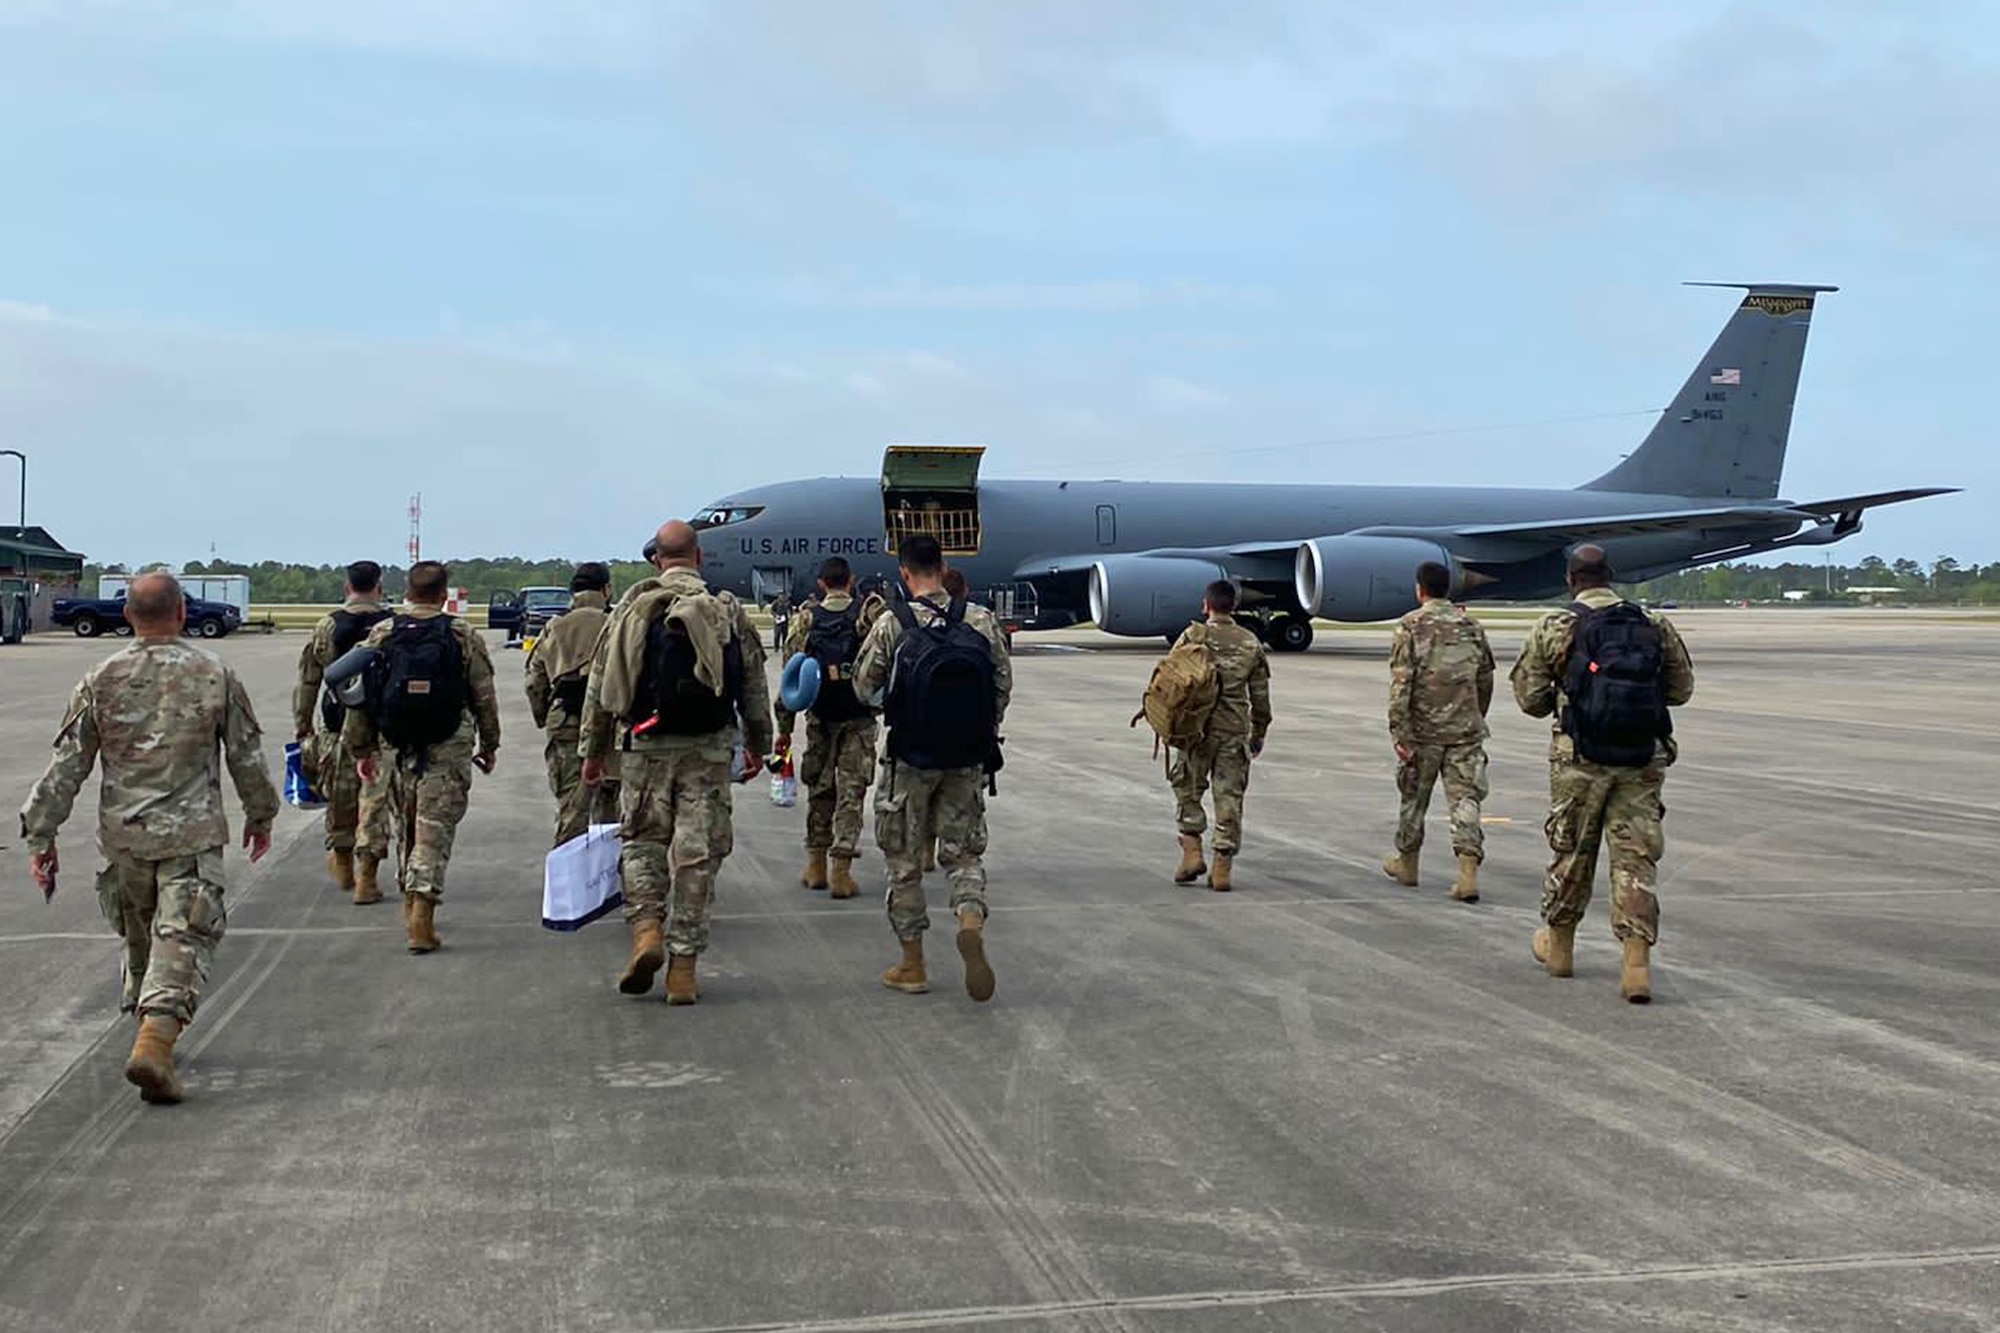 Airmen from the 141st Air Control Squadron, Puerto Rico Air National Guard, prepare for departure to Gulfport, Mississippi at Muniz Air National Guard Base, Carolina, Puerto Rico, April 14, 2021. These Airmen were part of the 141st Air Control Squadron group that participated in this year's Southern Strike exercise in Gulfport, Mississippi, April 15-29, 2021. Southern Strike is hosted by the National Guard Bureau and is a total force, full-spectrum warfare training event. It incorporates National Guard, Active Duty and Reserve components in the exercise. (U.S. Air National Guard courtesy photo by Capt. Angel Ríos)